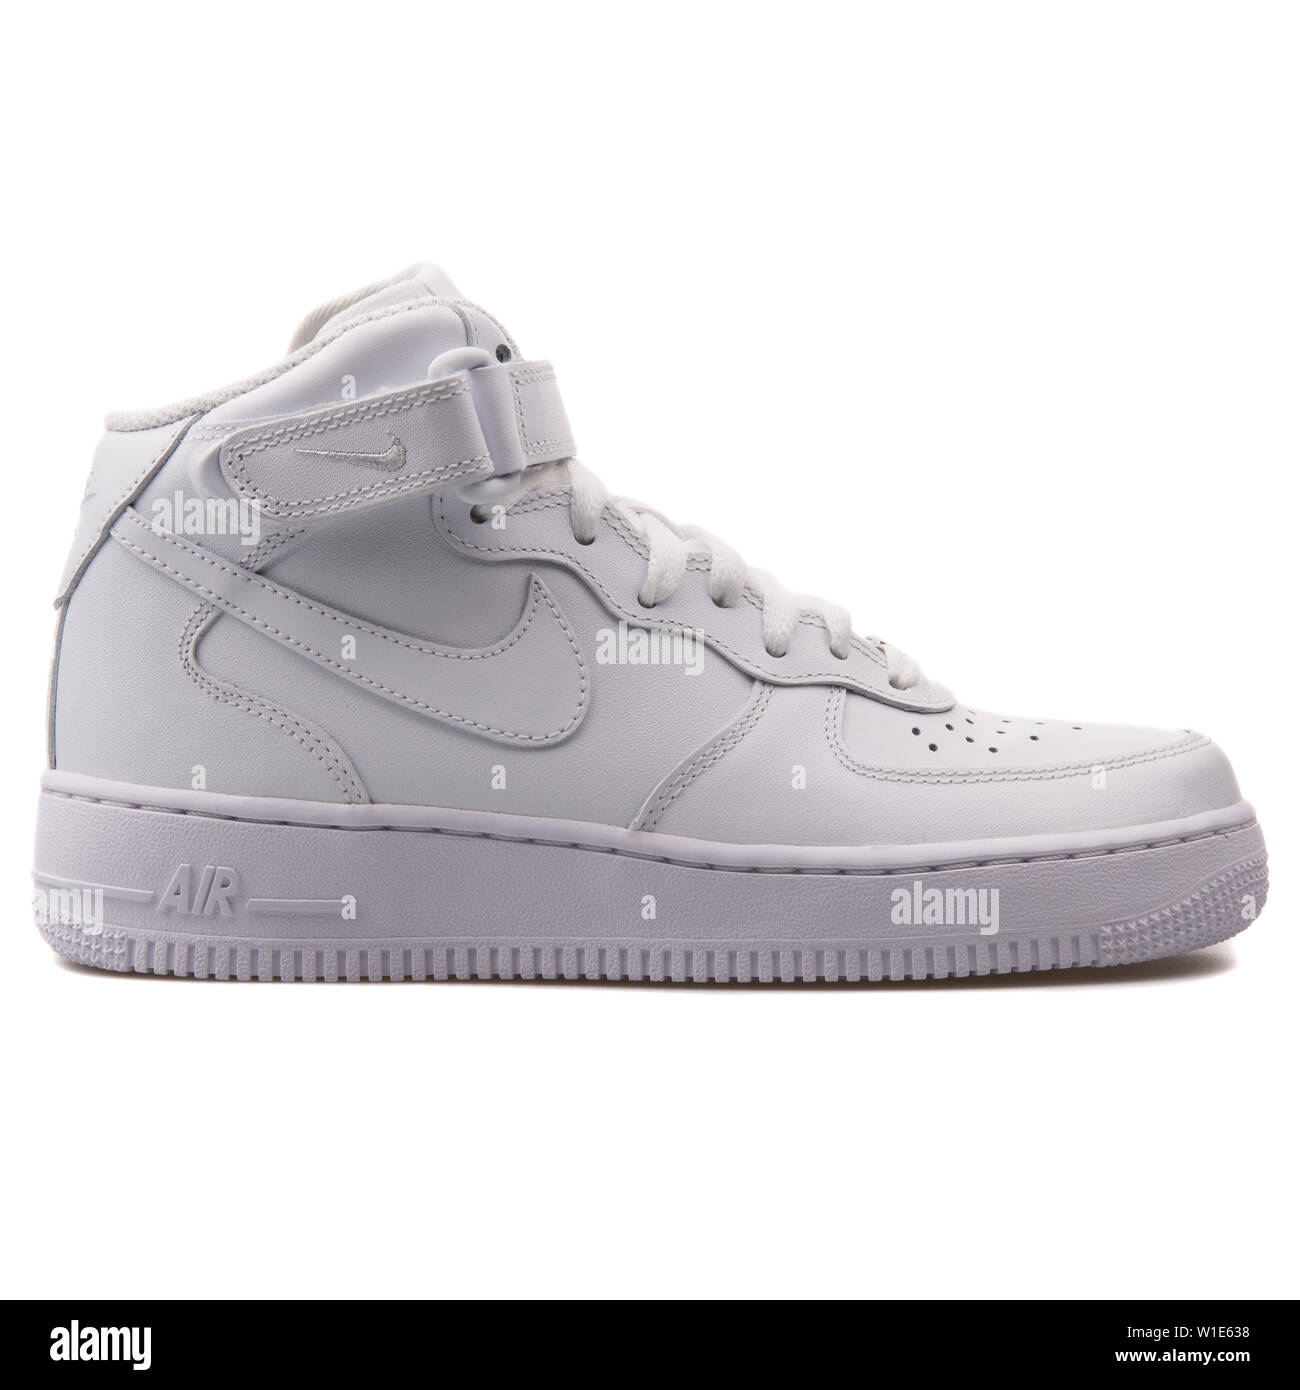 VIENNA, AUSTRIA - AUGUST 25, 2017: Nike Air Force 1 Mid 07 Leather white  sneaker on white background Stock Photo - Alamy